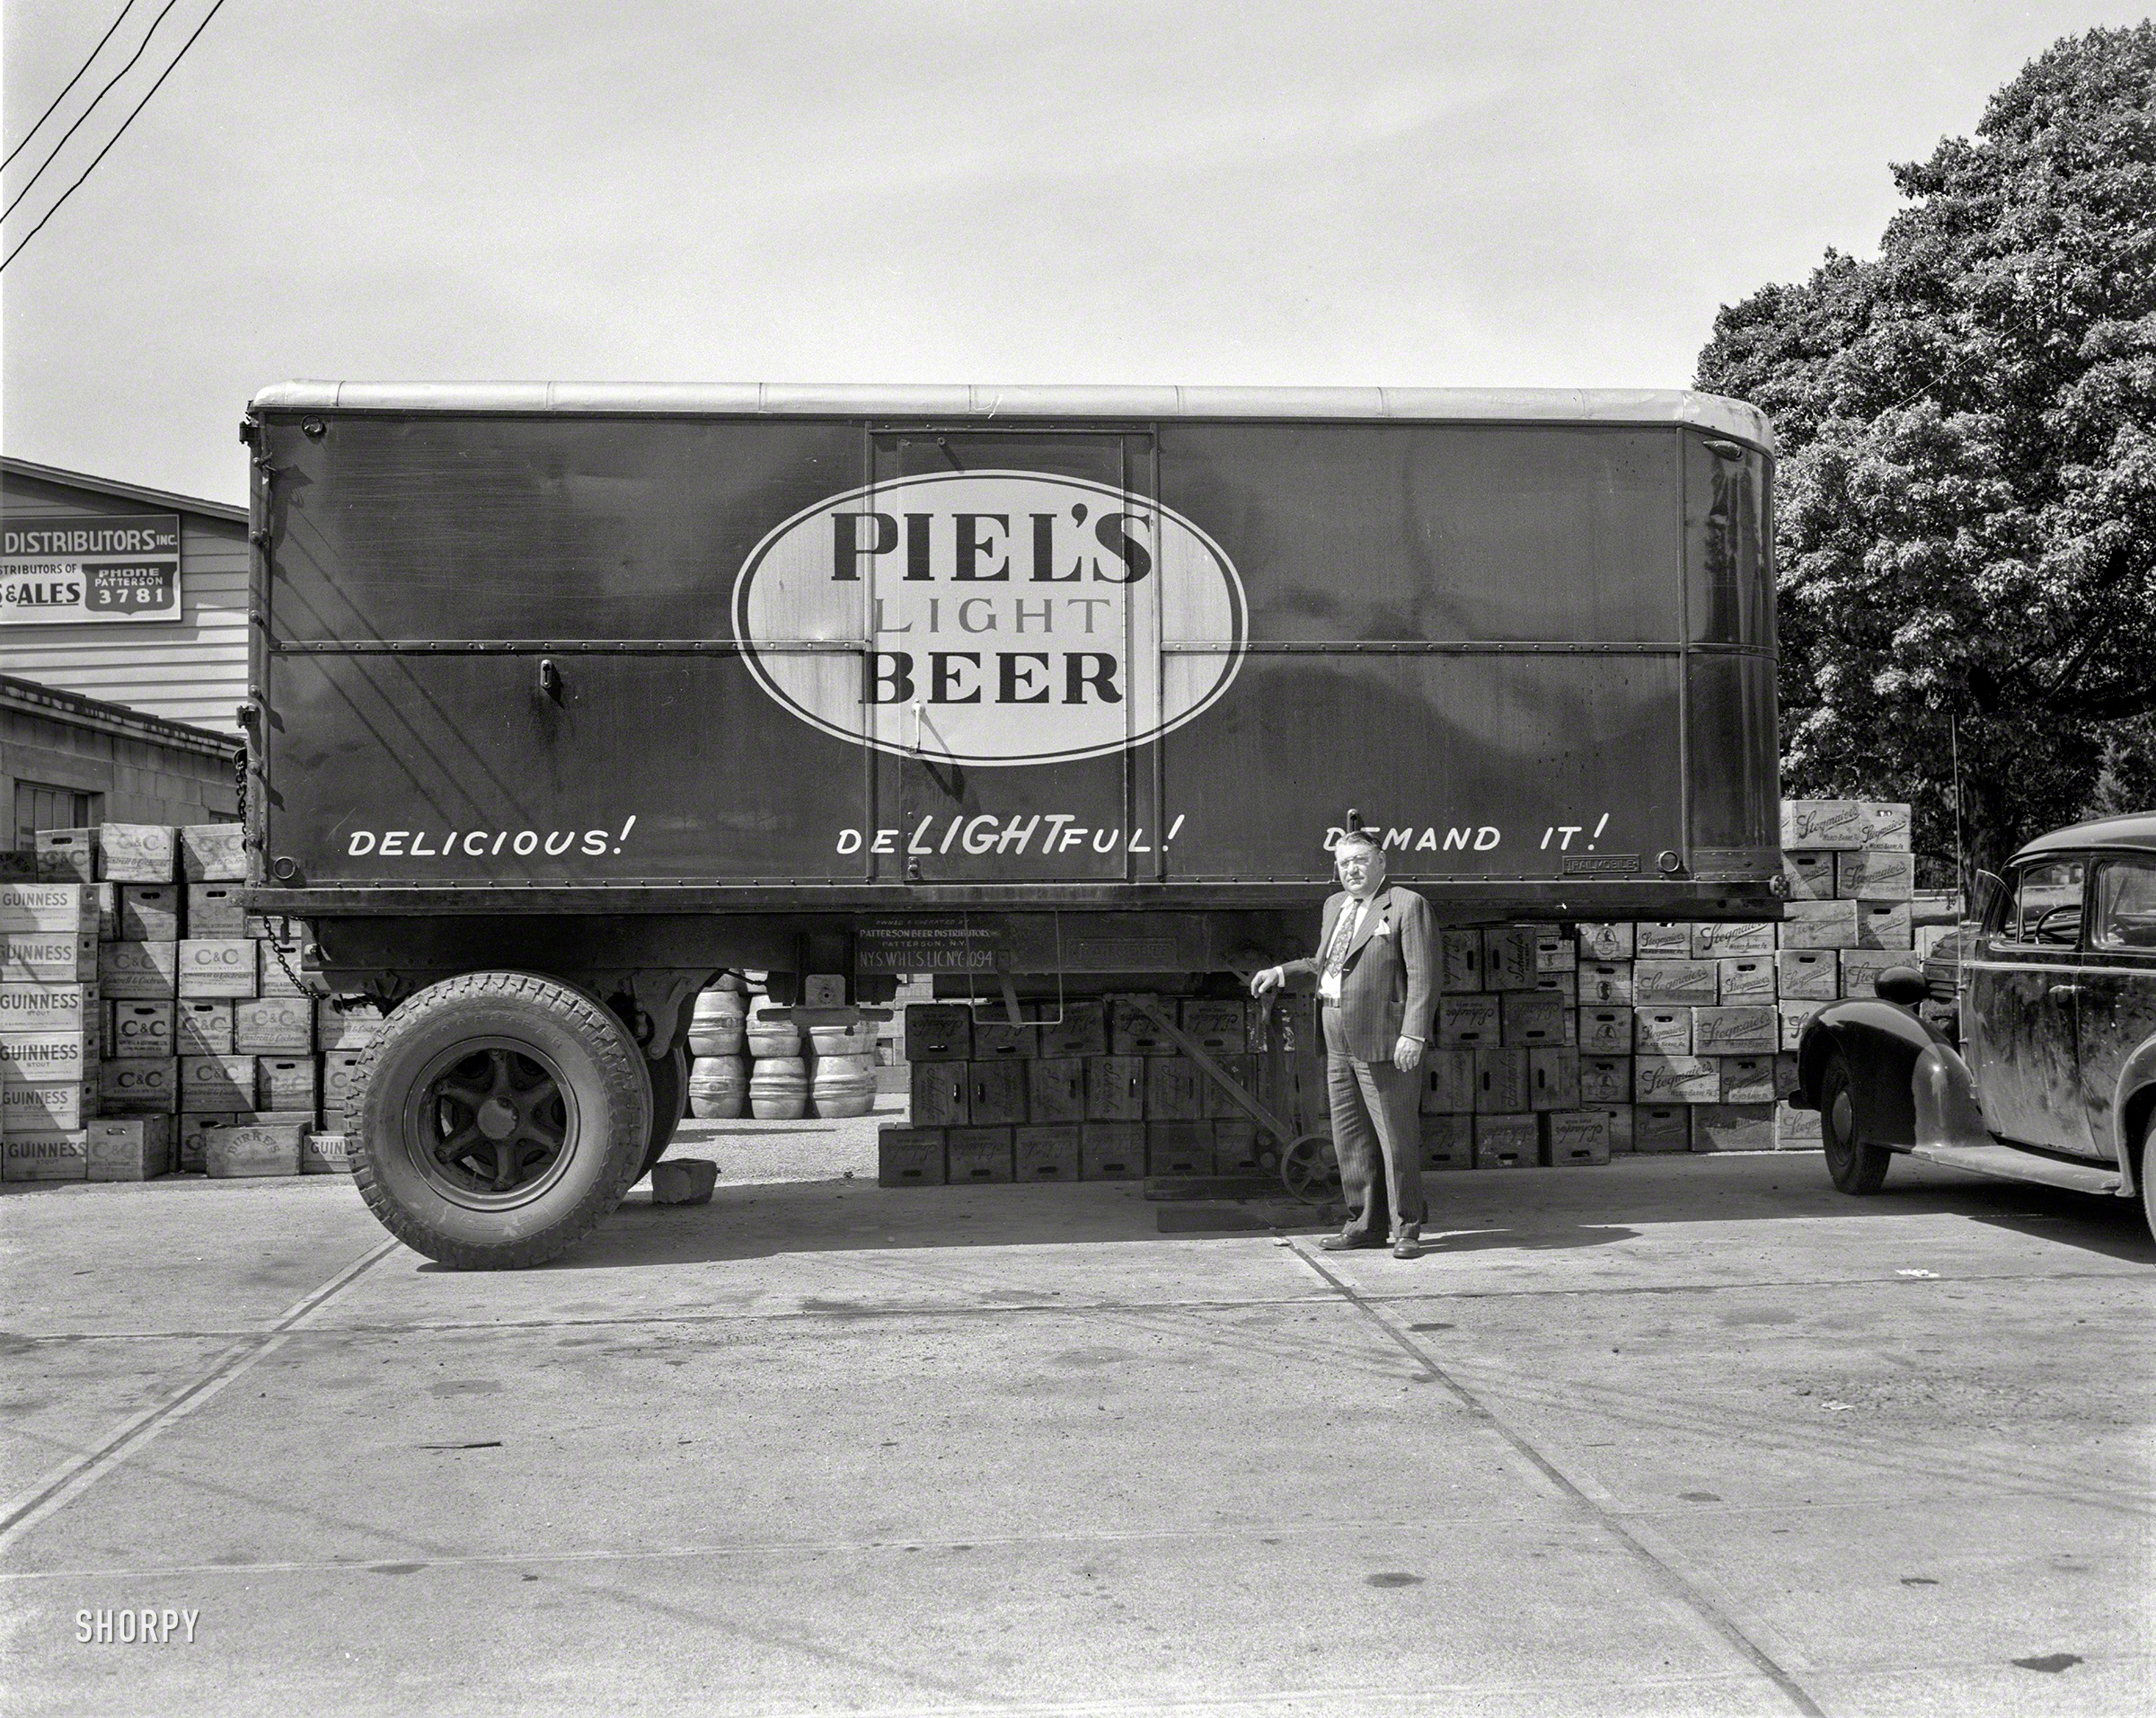 New York circa 1948. "Patterson Beer Distributors -- Piel's Beer truck." It's Delic&shy;ious, DeLIGHTful, Demand It!  4x5 negative by John M. Fox. View full size.